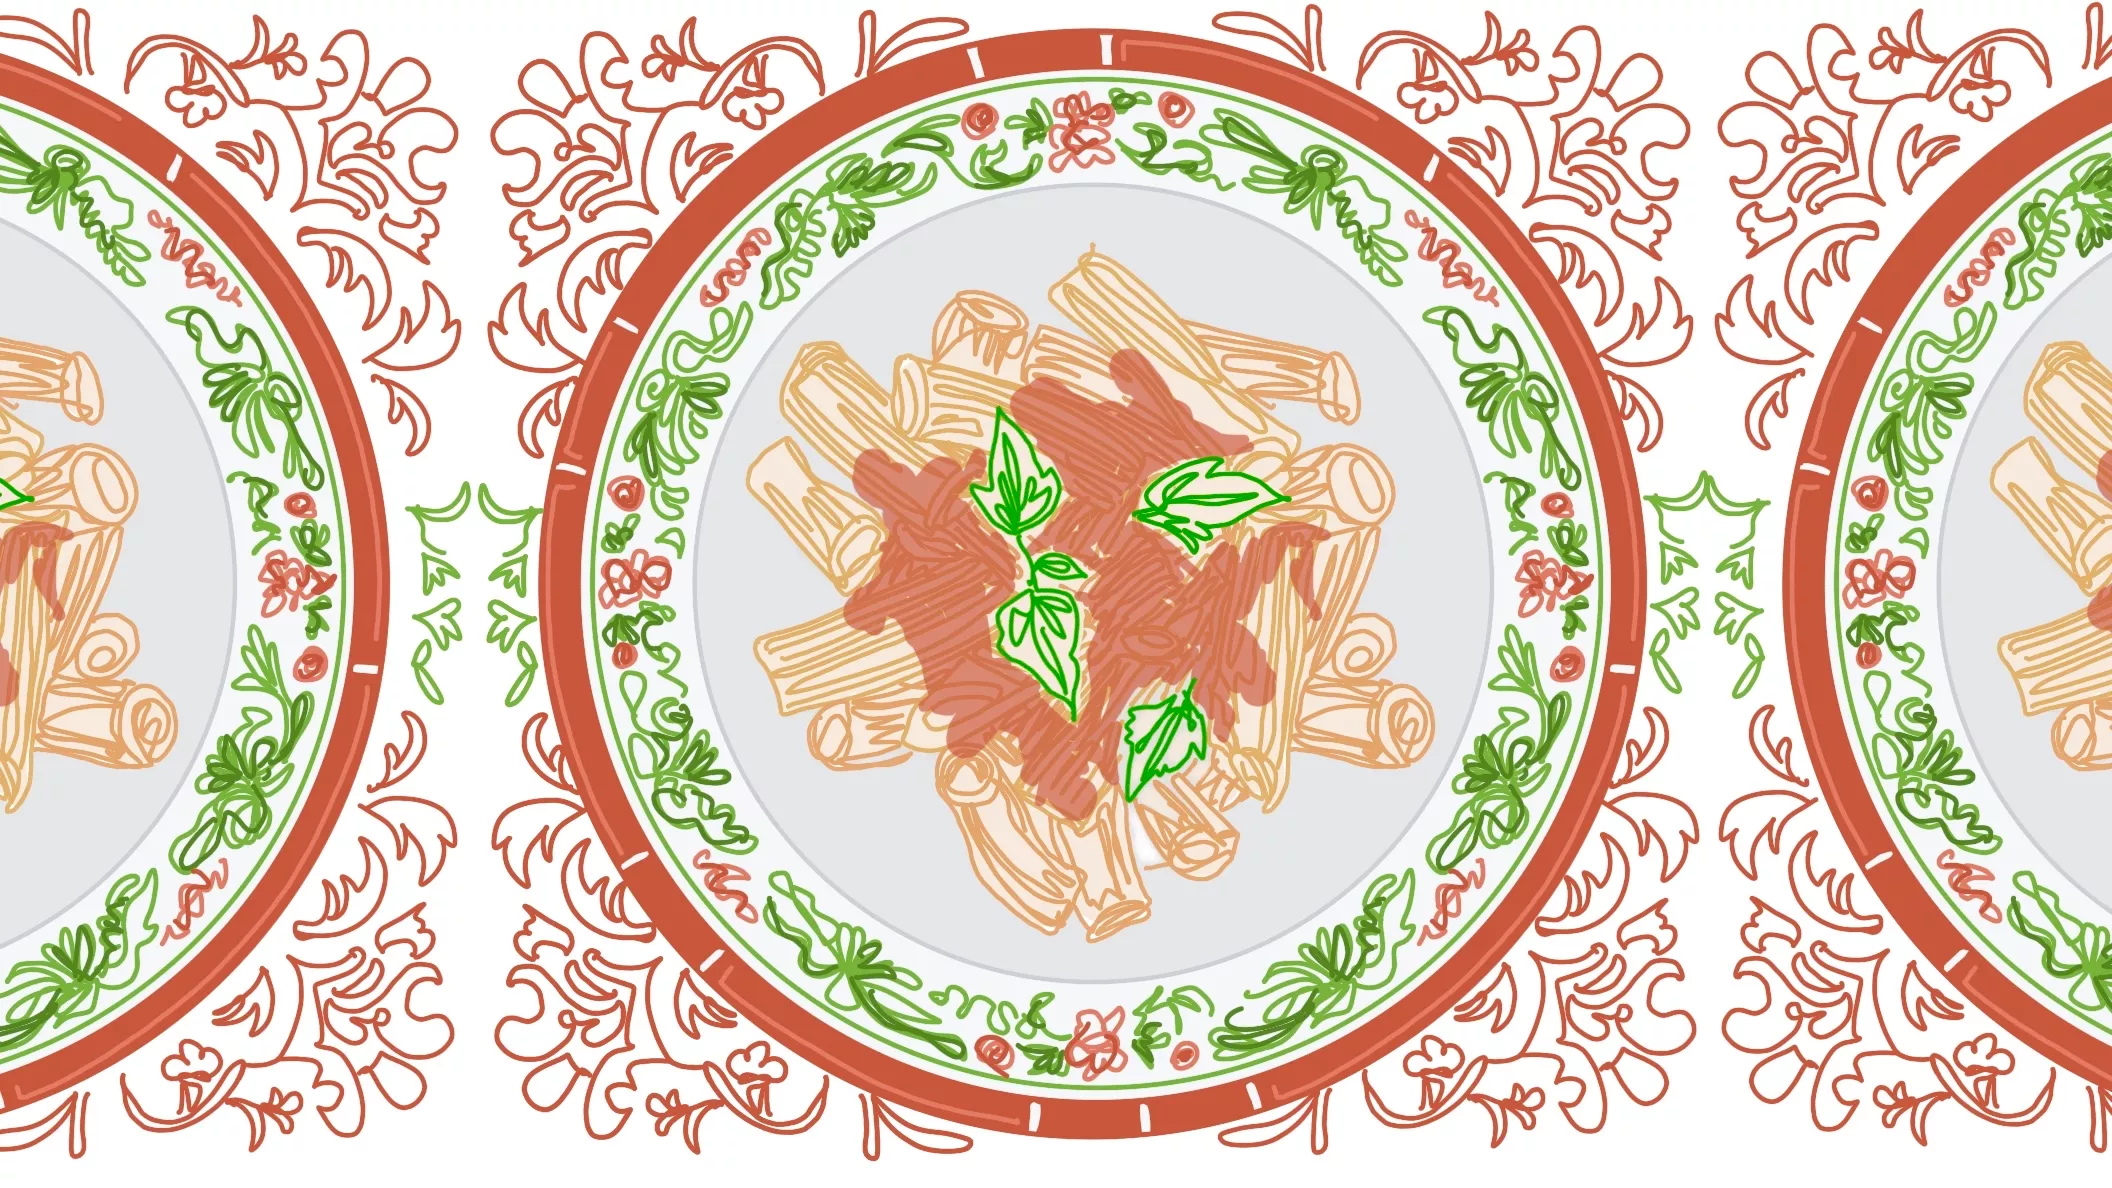 Three plates of pasta with tomato sauce and basil on a red and white patterned tablecloth.